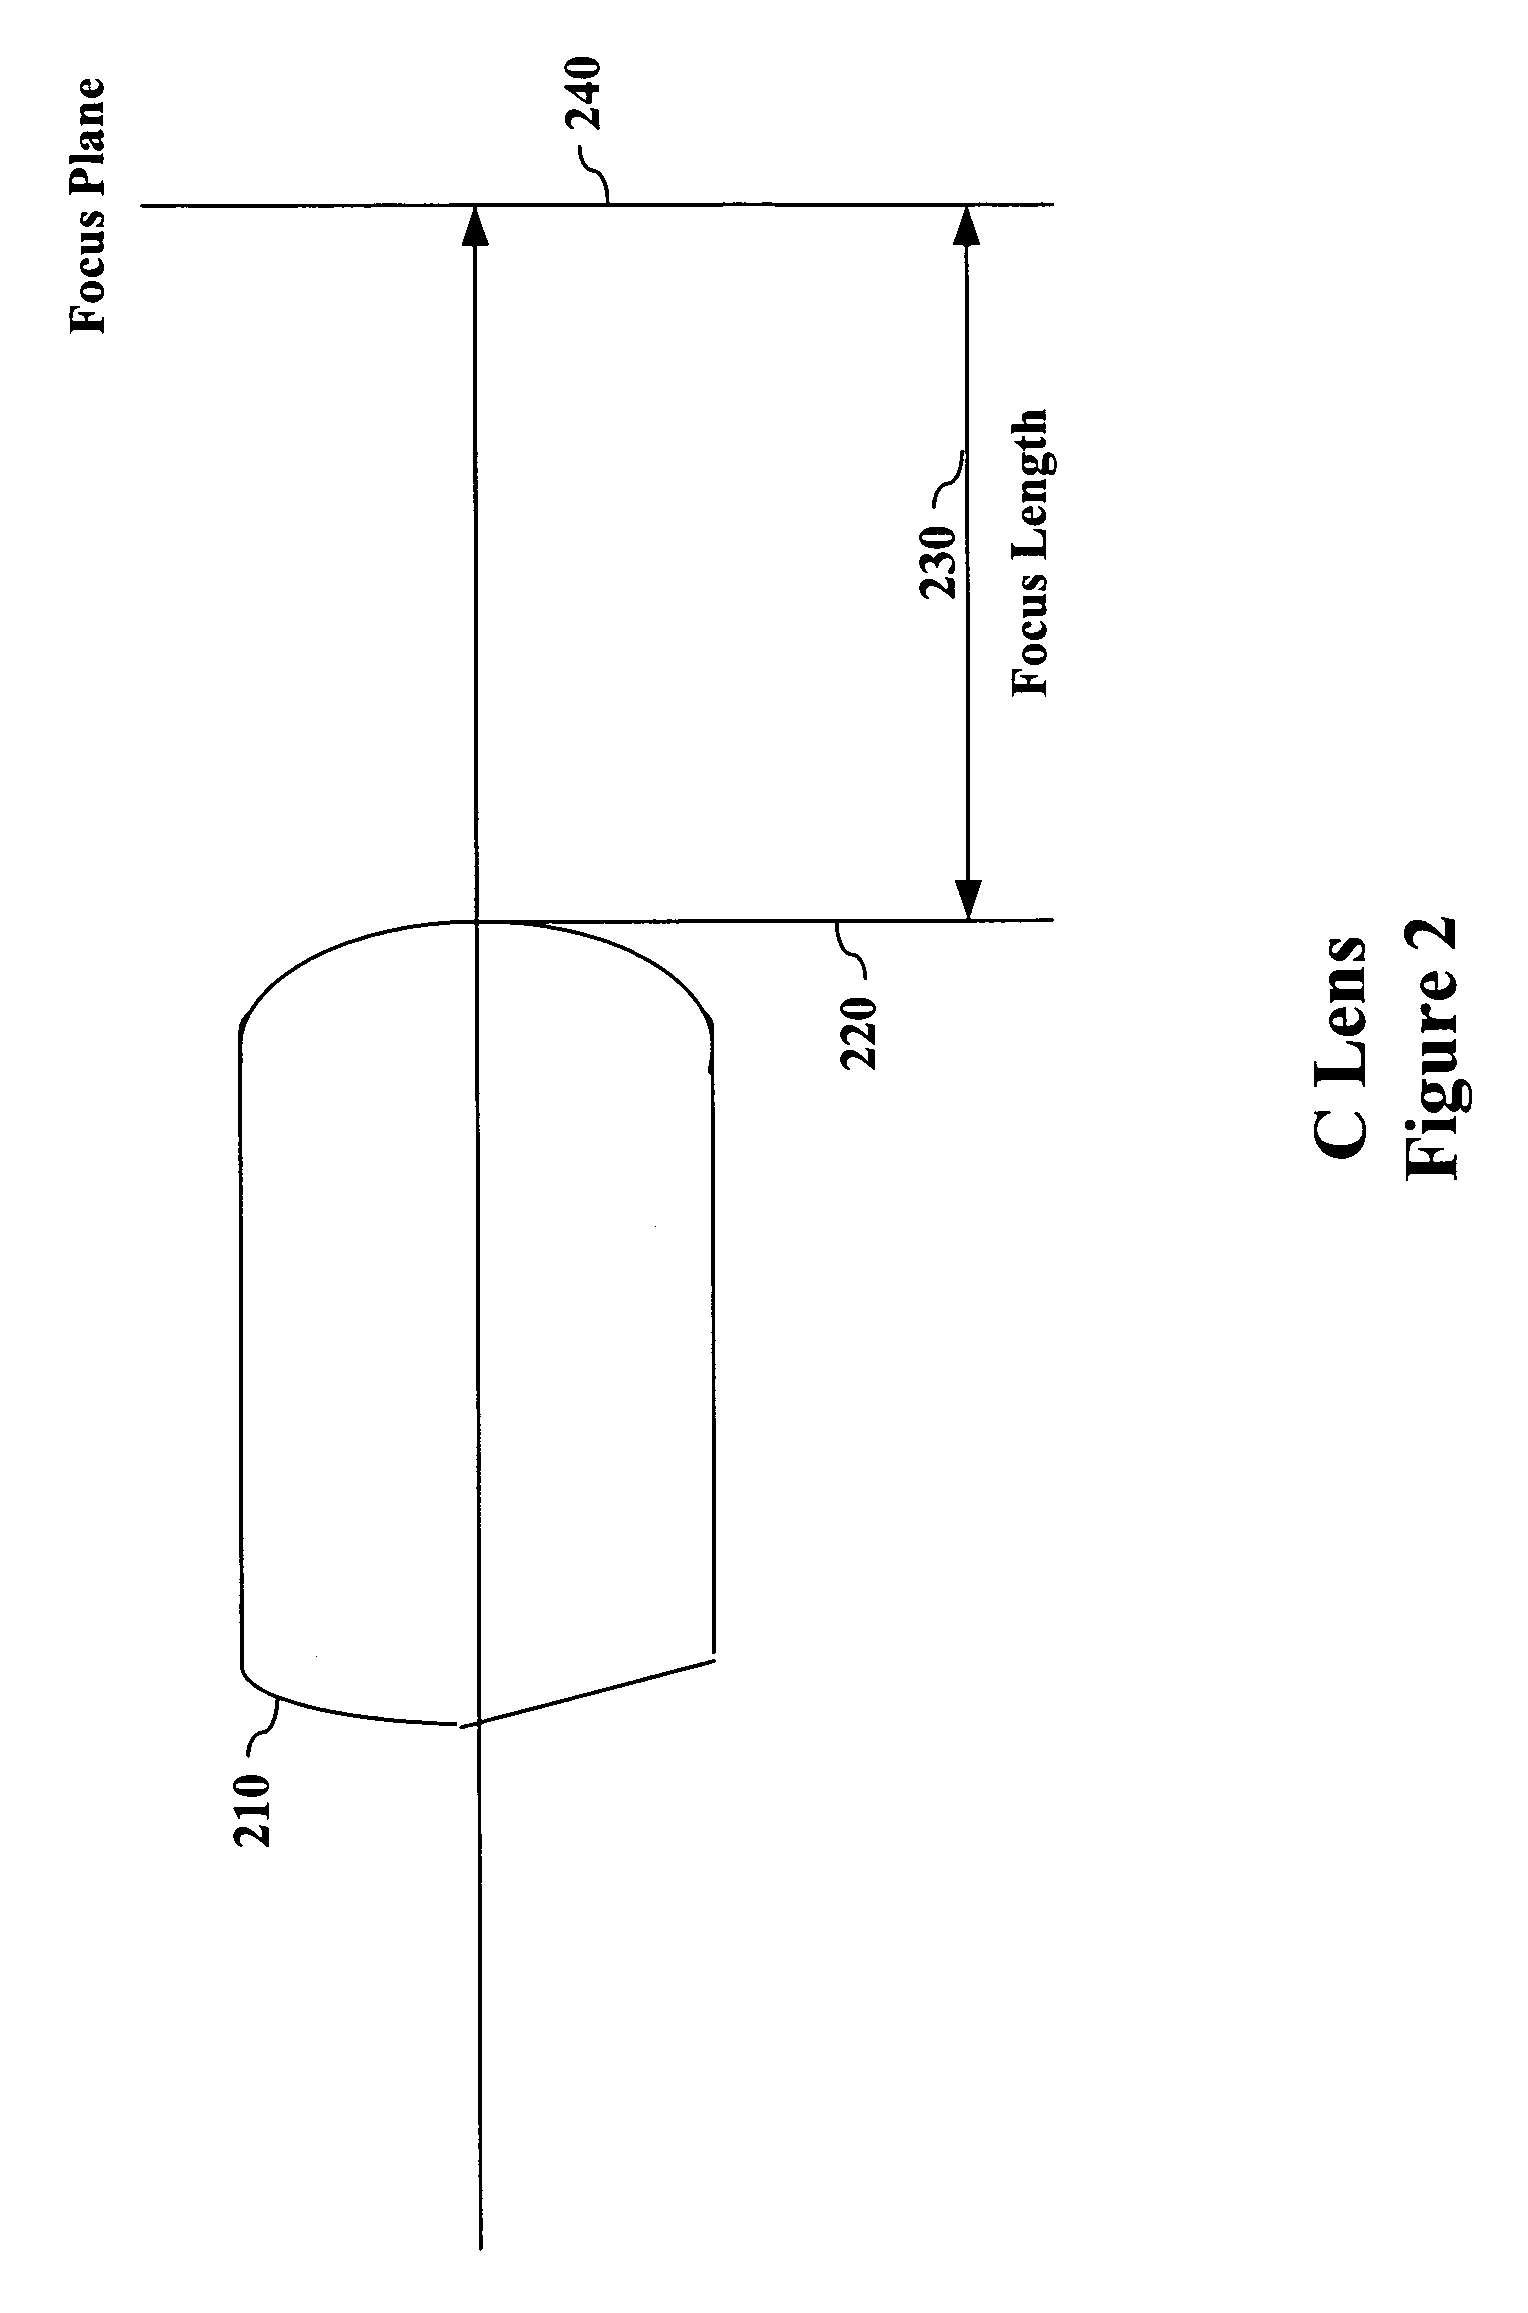 Glass package for optical device